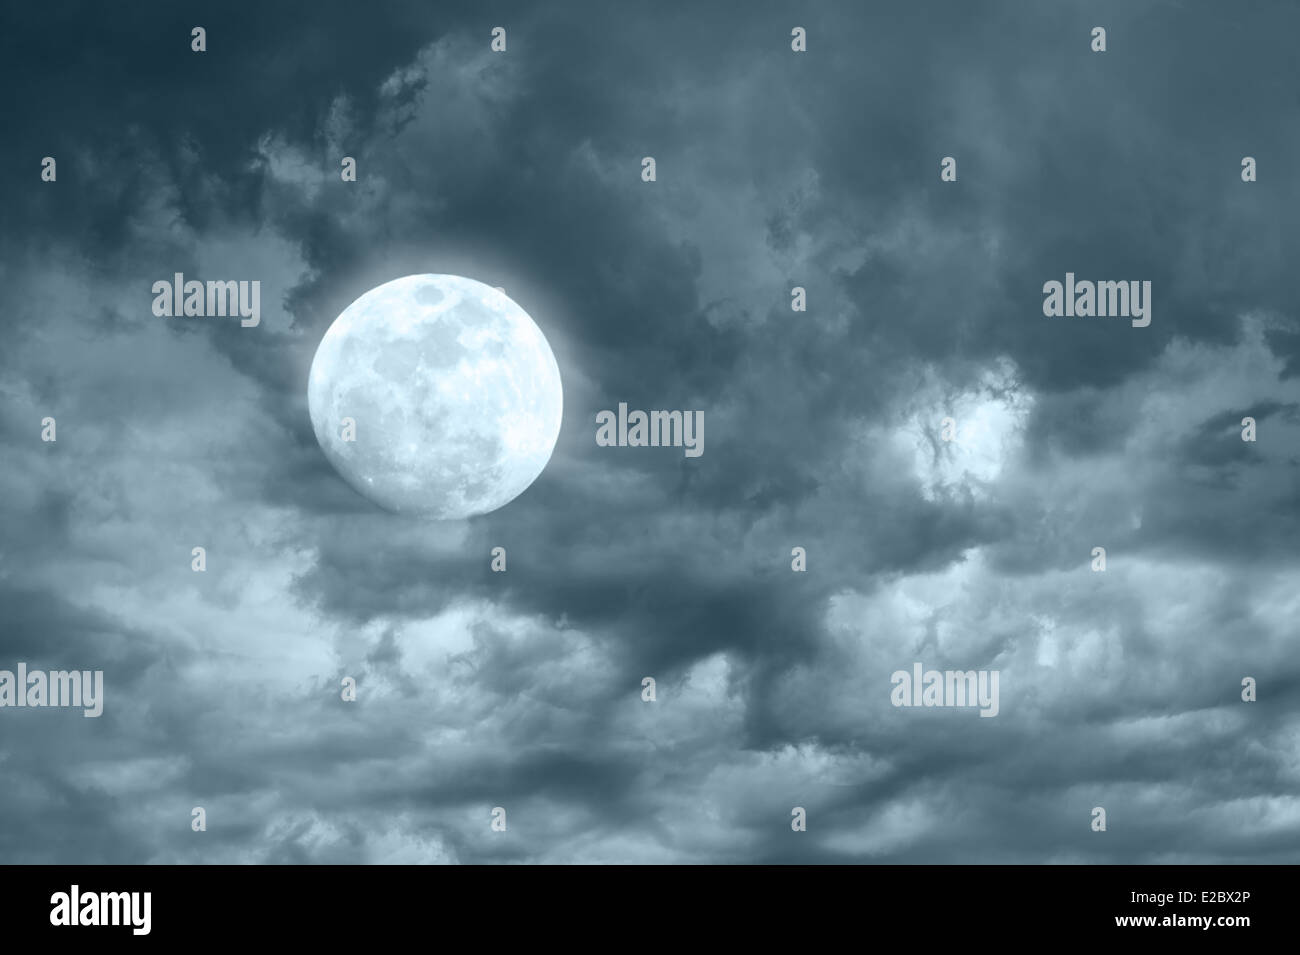 Amazing night sky with shining full moon and dramatic clouds Stock Photo